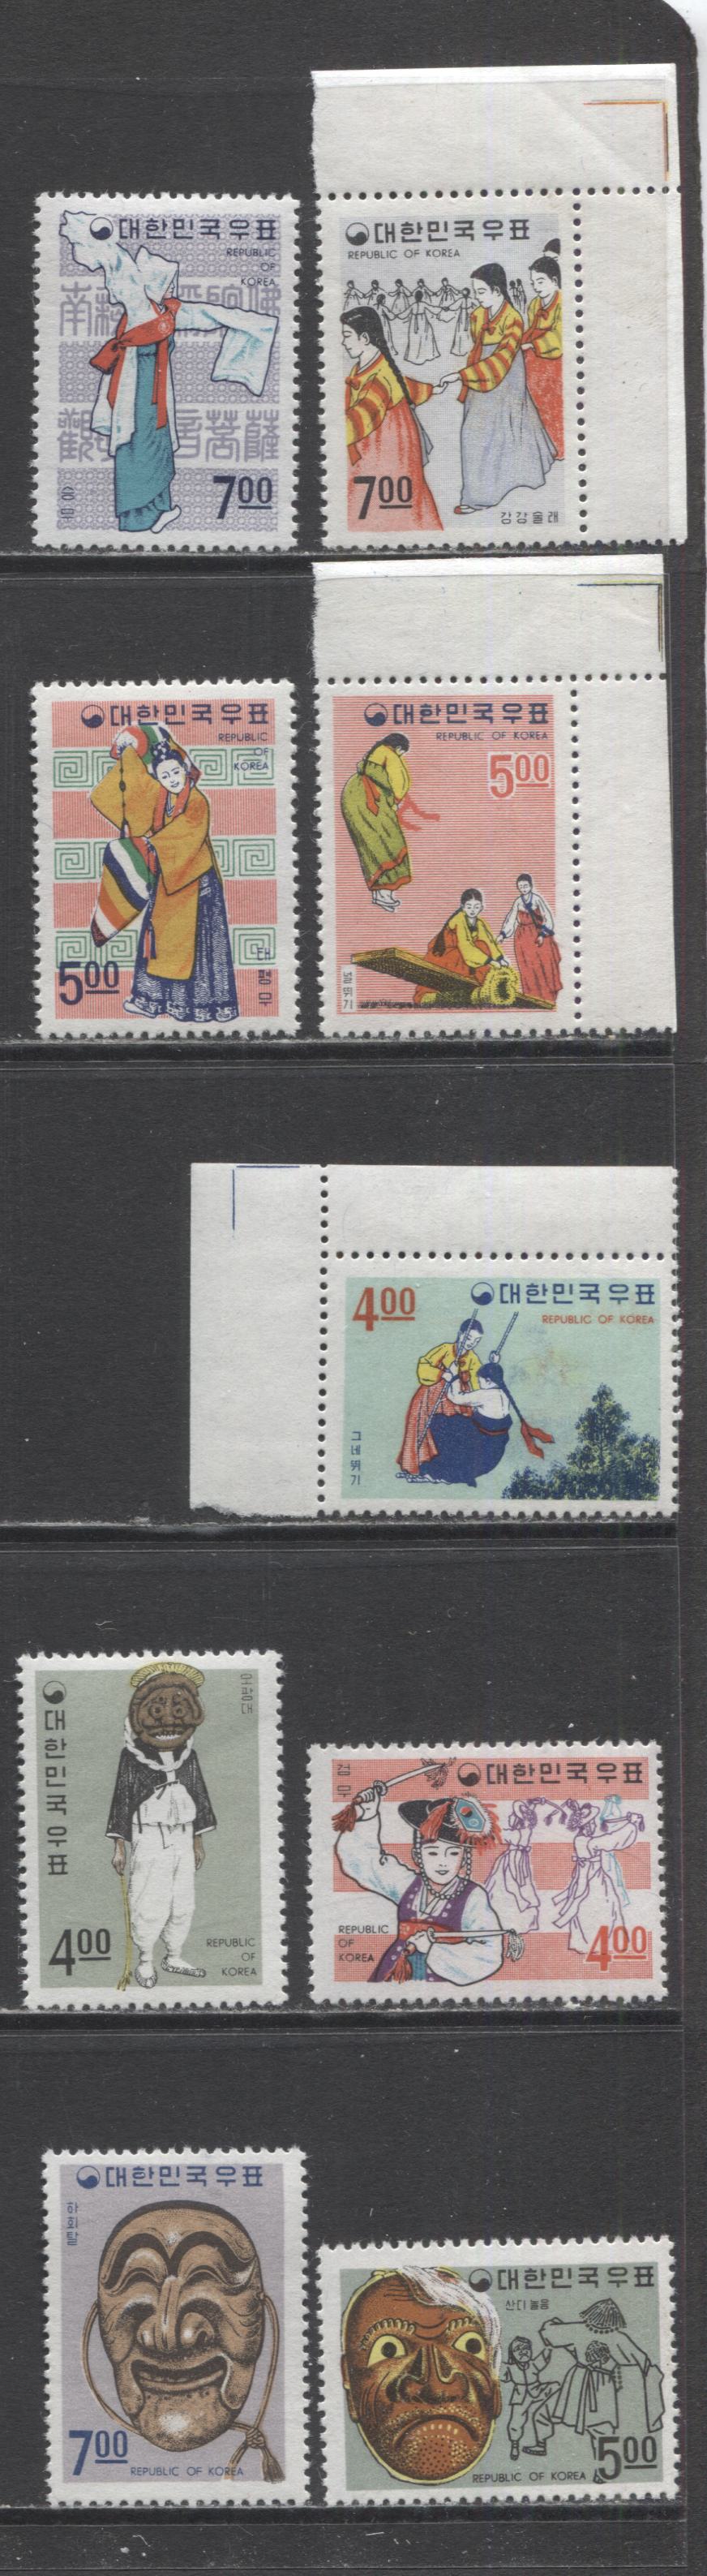 Lot 377 Korea SC#552-560 1967 Folklore Scenes Issue, A VFNH Range Of Singles, 2017 Scott Cat. $36.8 USD, Click on Listing to See ALL Pictures